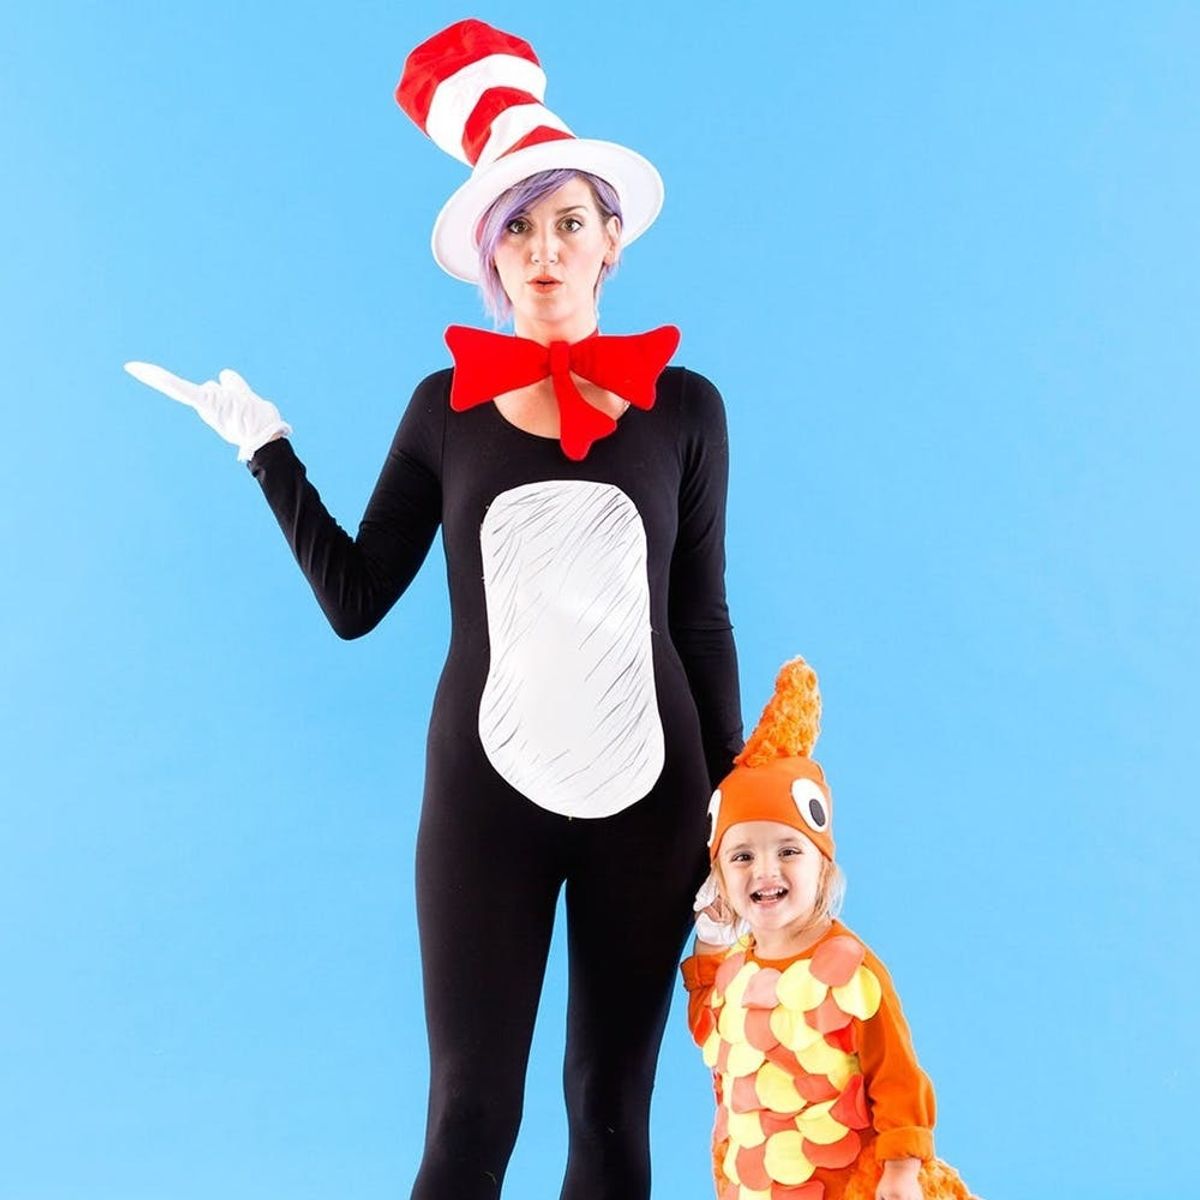 Make a Boom in These “Cat in the Hat” Halloween Costumes